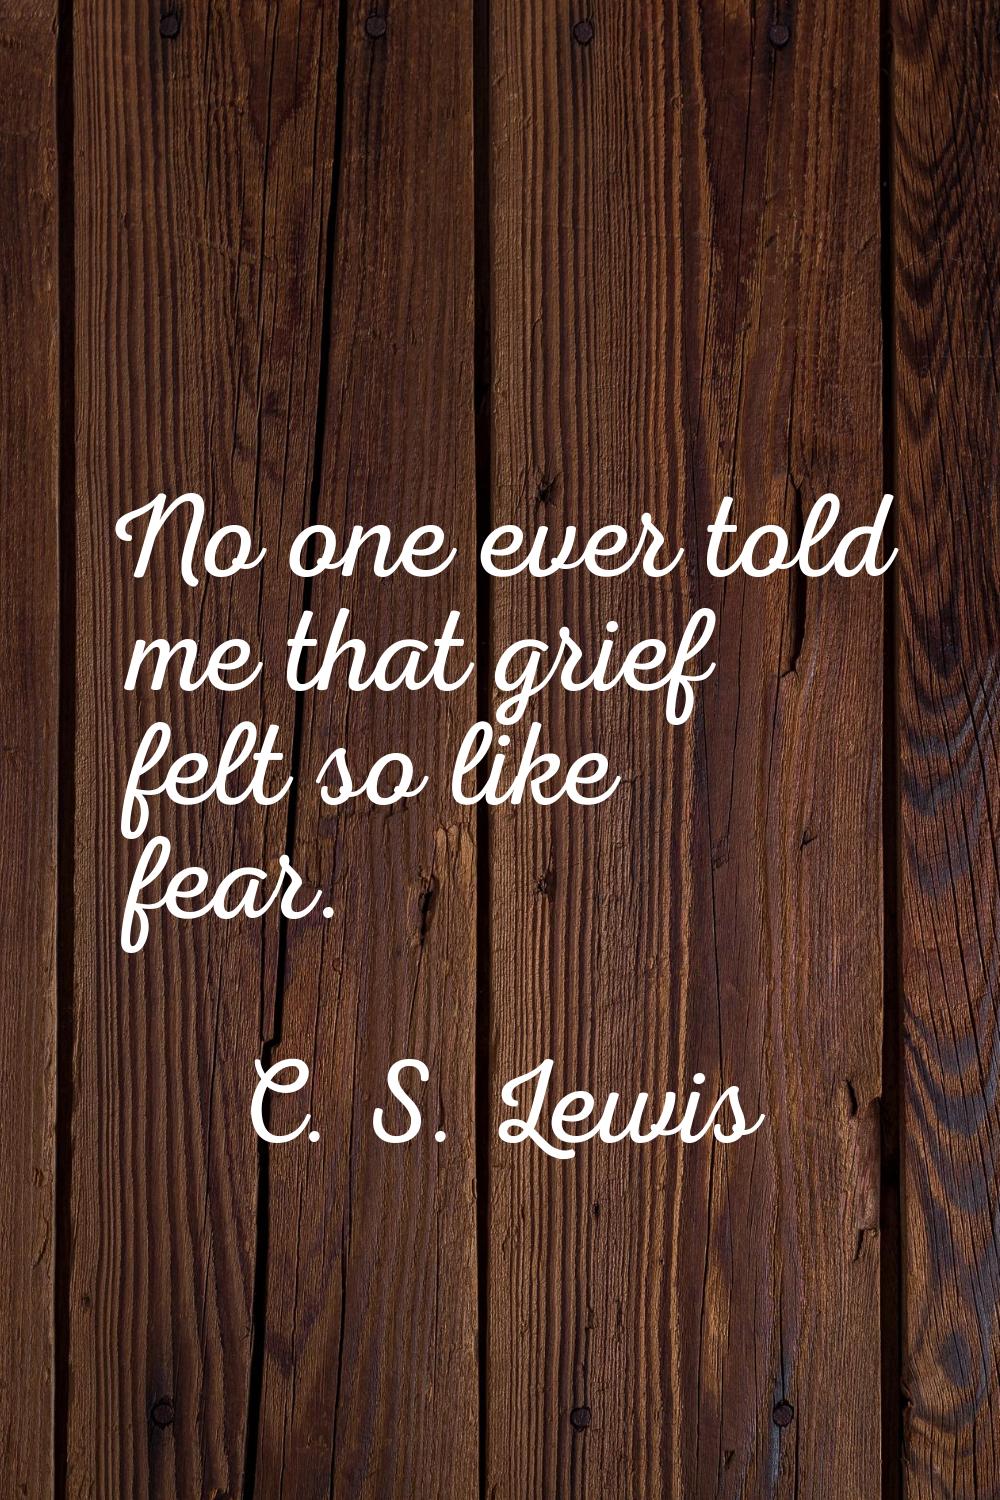 No one ever told me that grief felt so like fear.